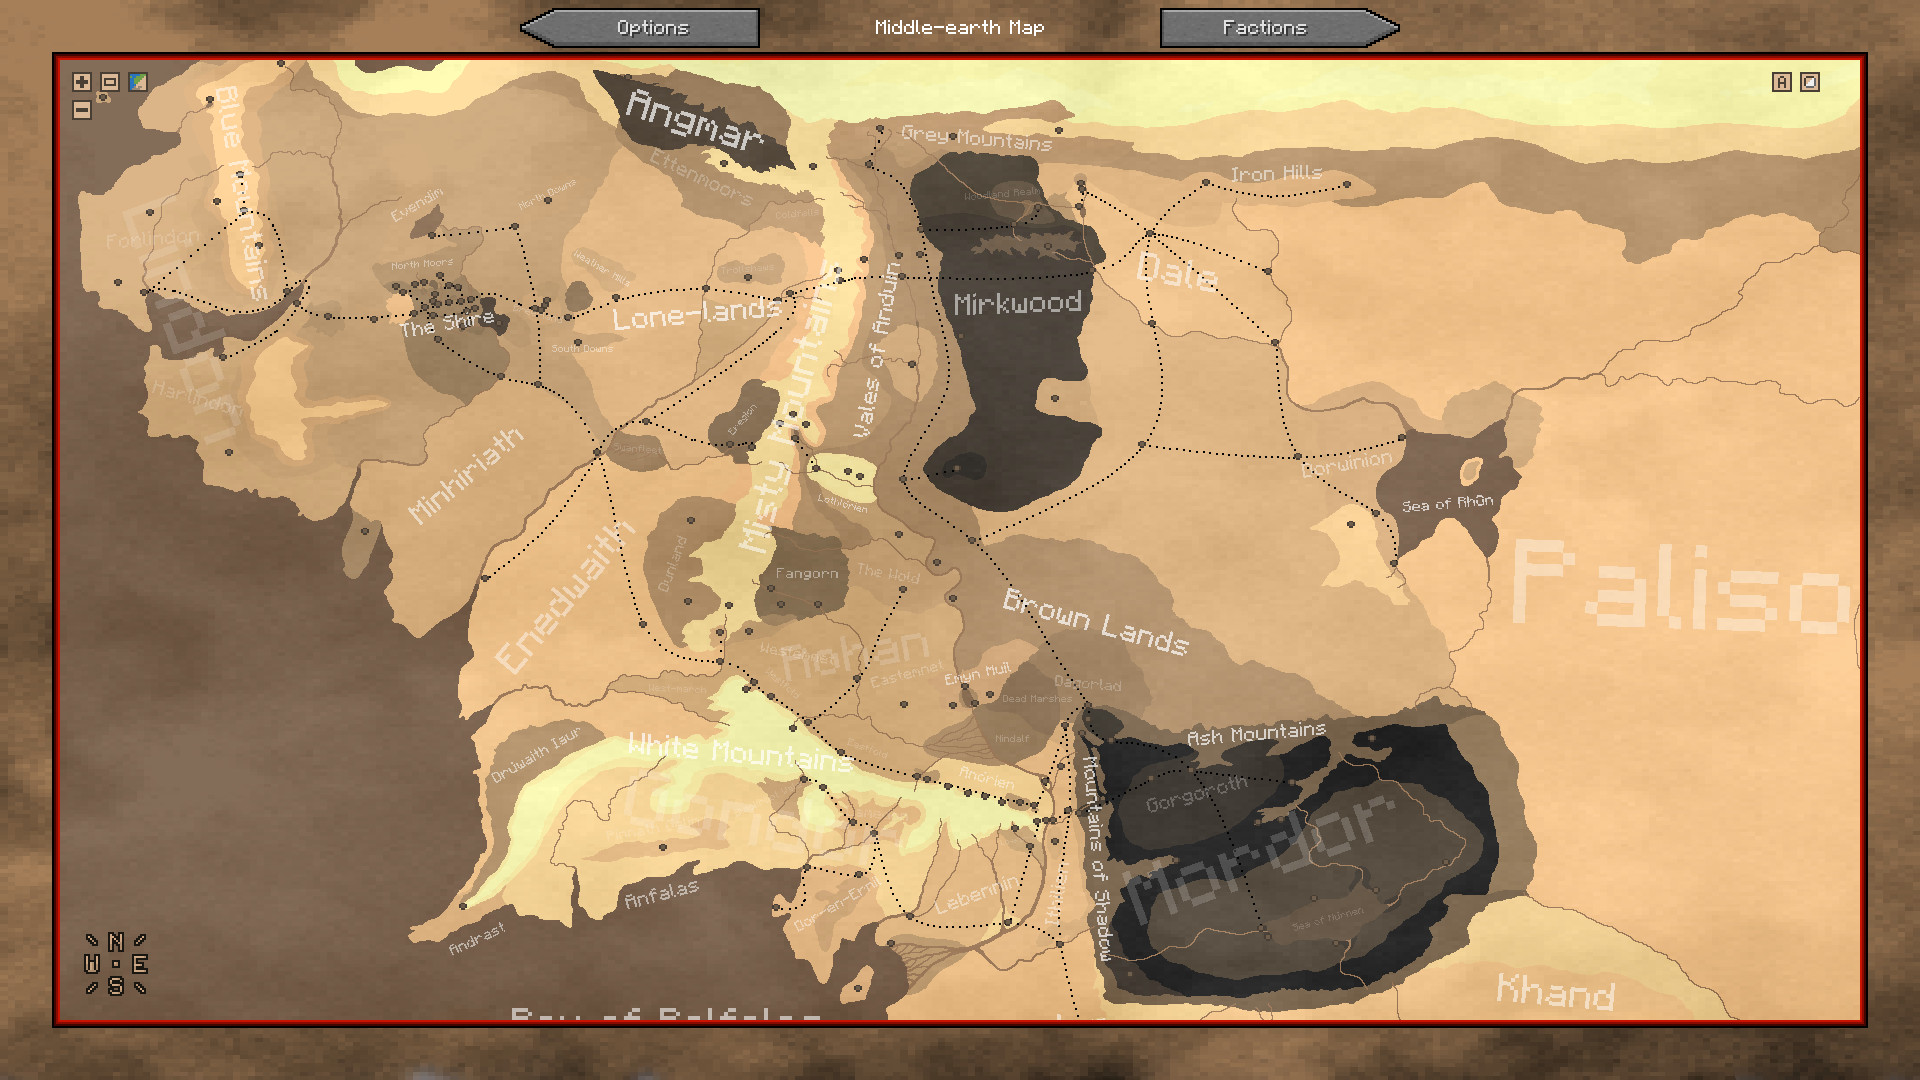 1920x1080 Image - Middle-earth Waypoint Map-sepia.png | The Lord of the Rings  Minecraft Mod Wiki | FANDOM powered by Wikia